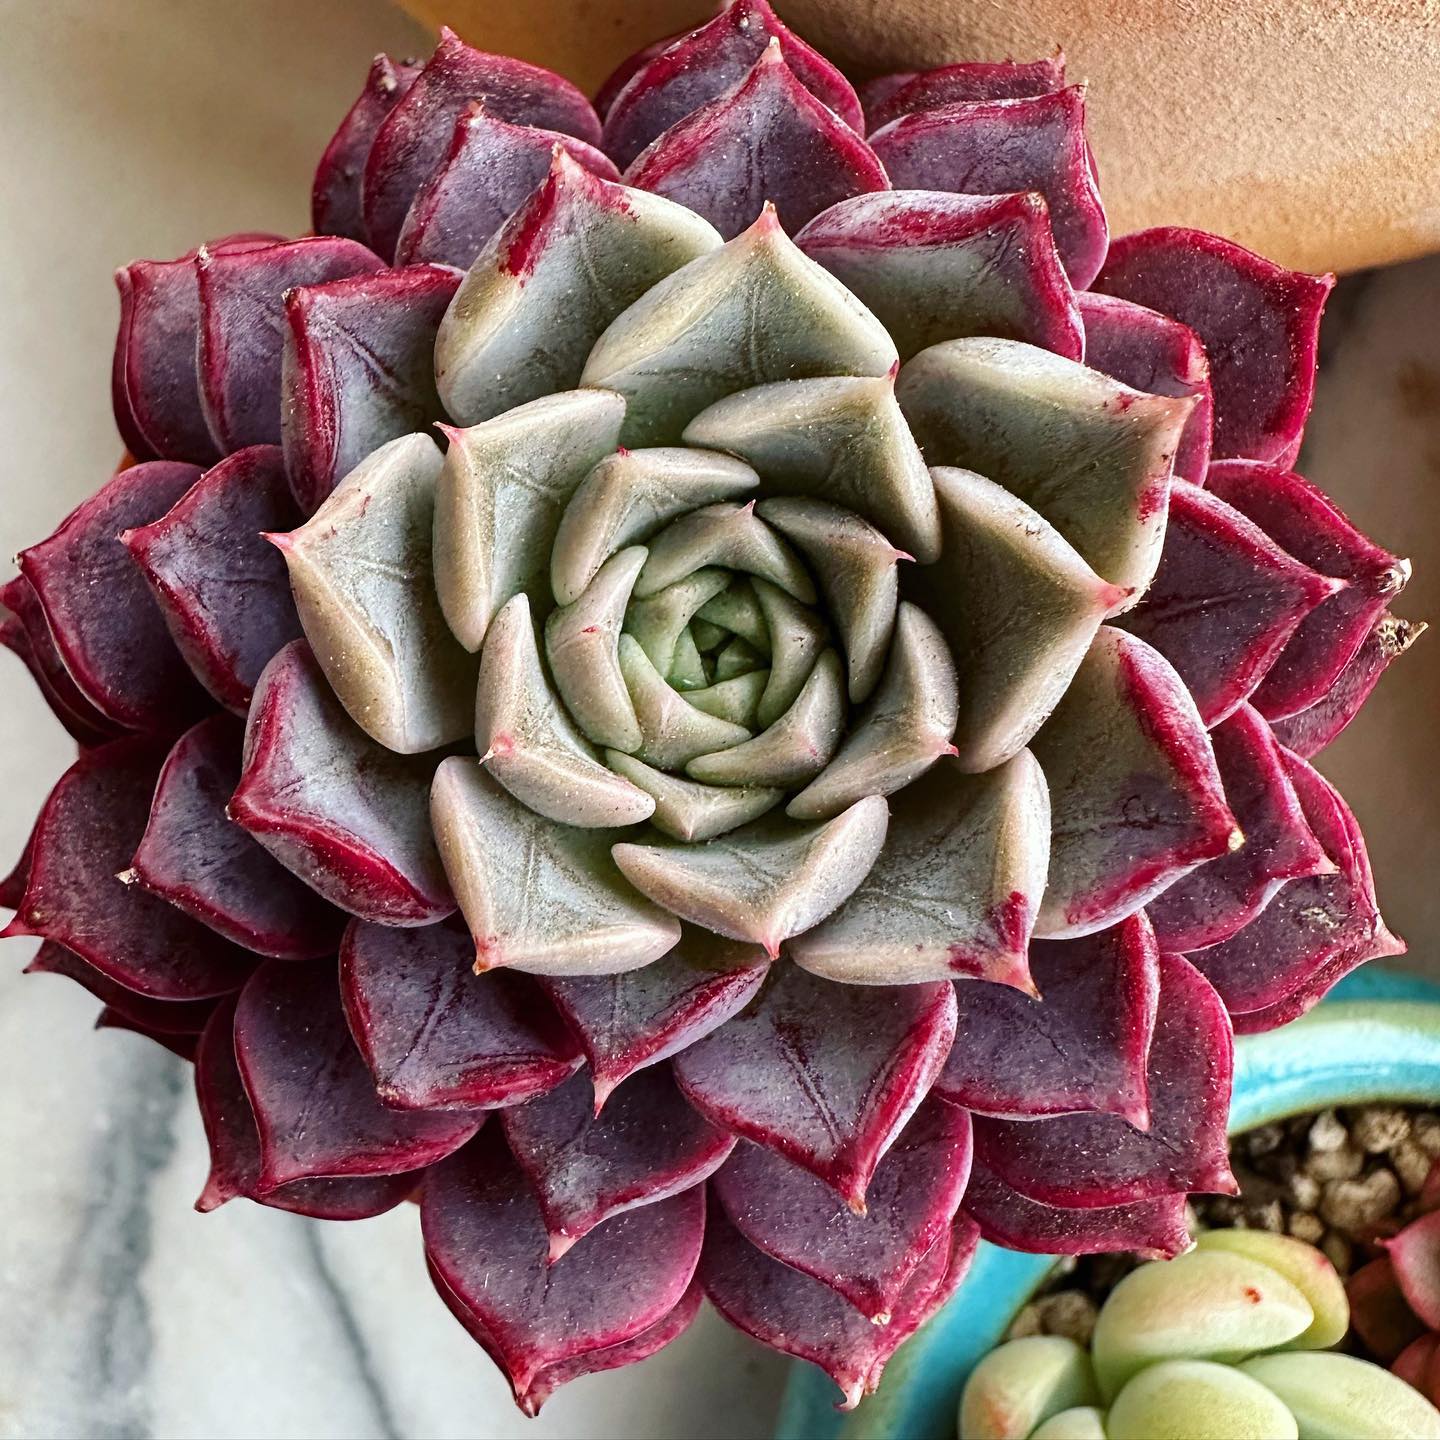 Top 40 Most Popular Types Of Echeveria Pictorial Guide